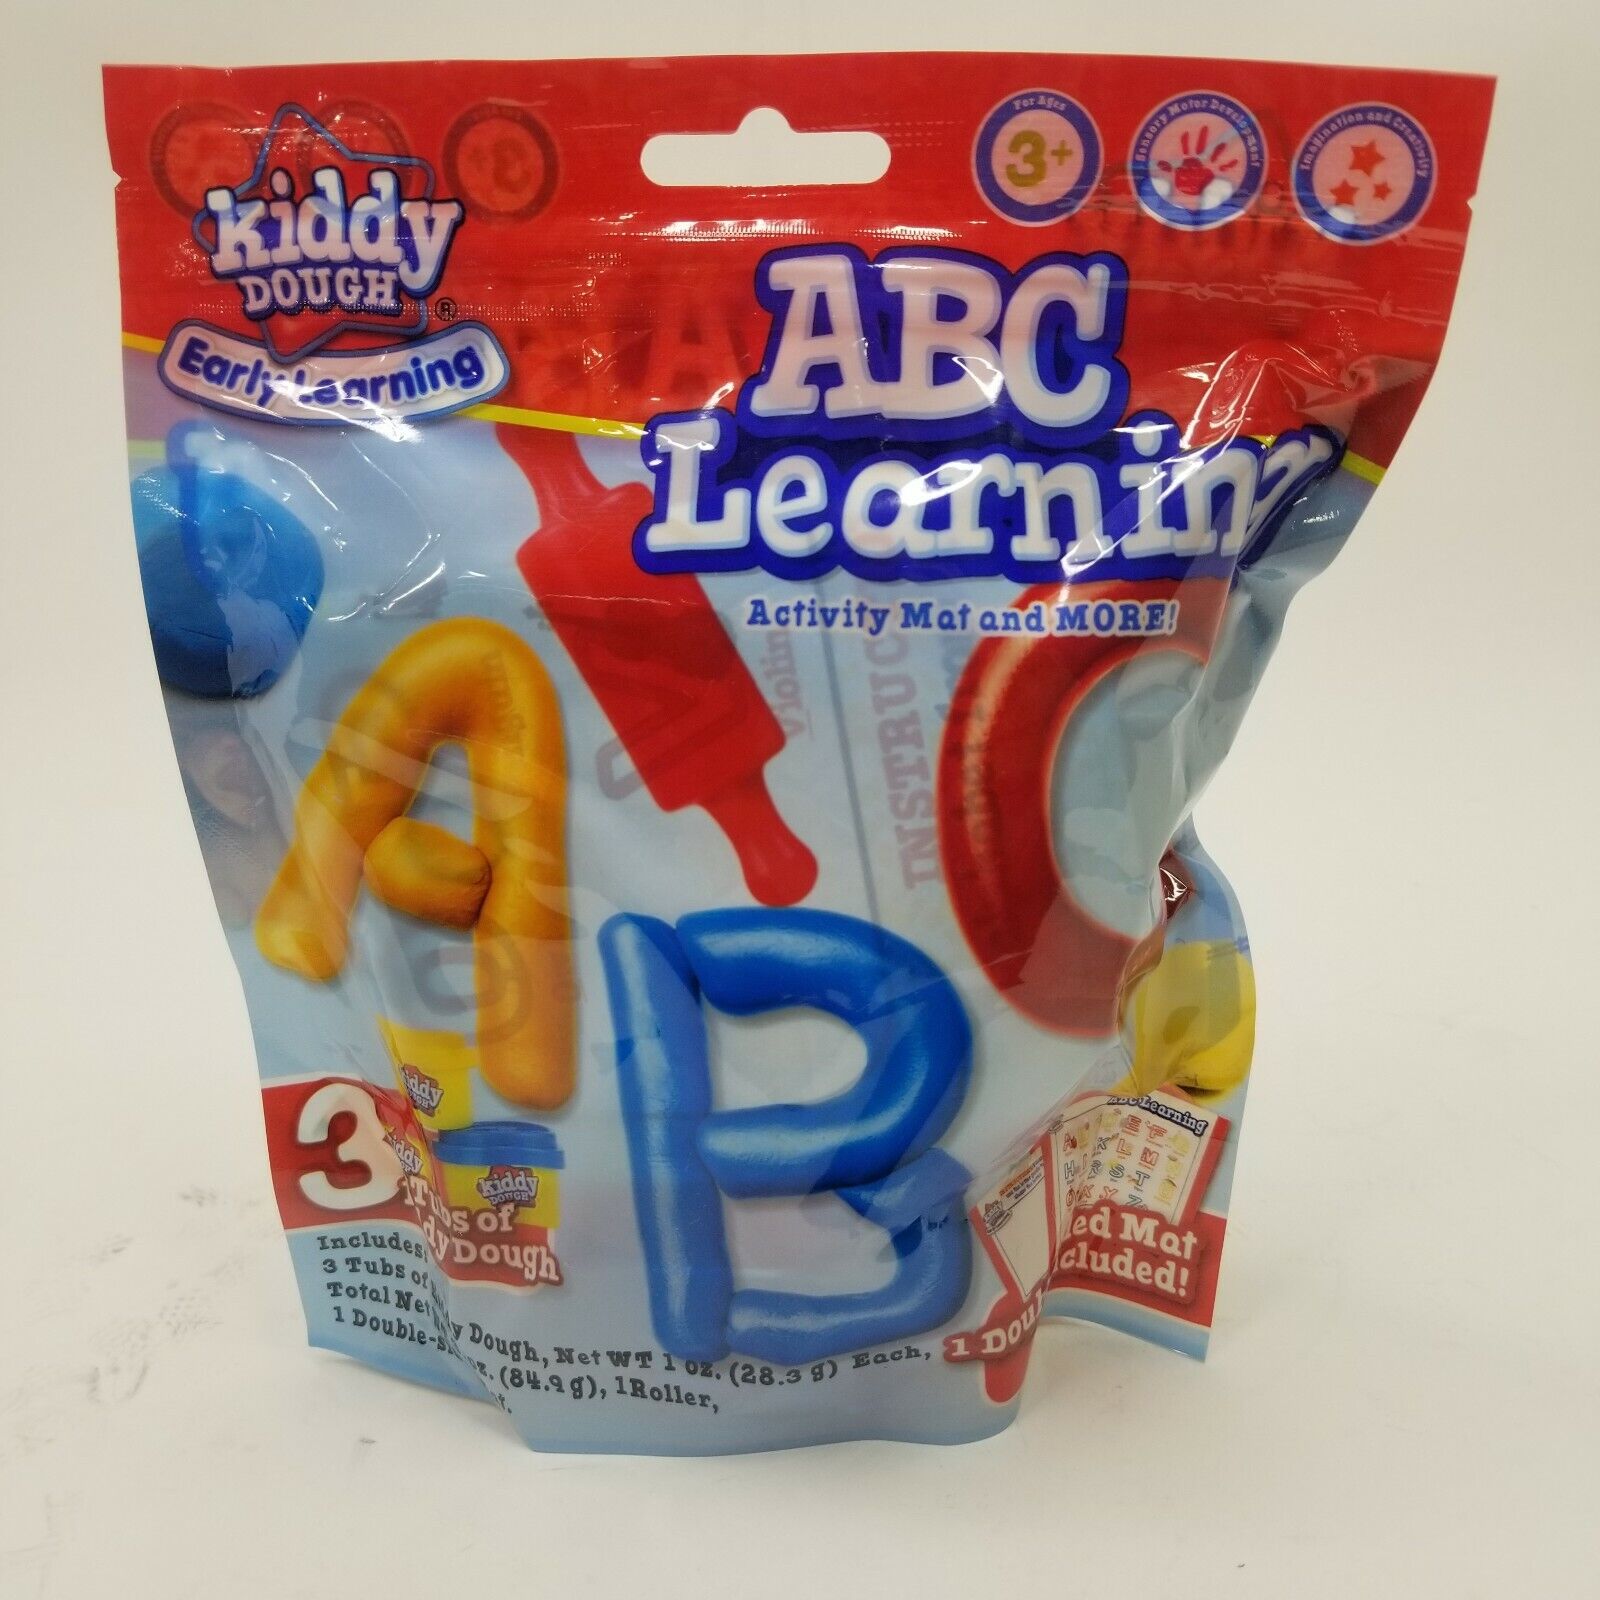 Kiddy Dough Early Learning ABC Learning Activity Mat and More New